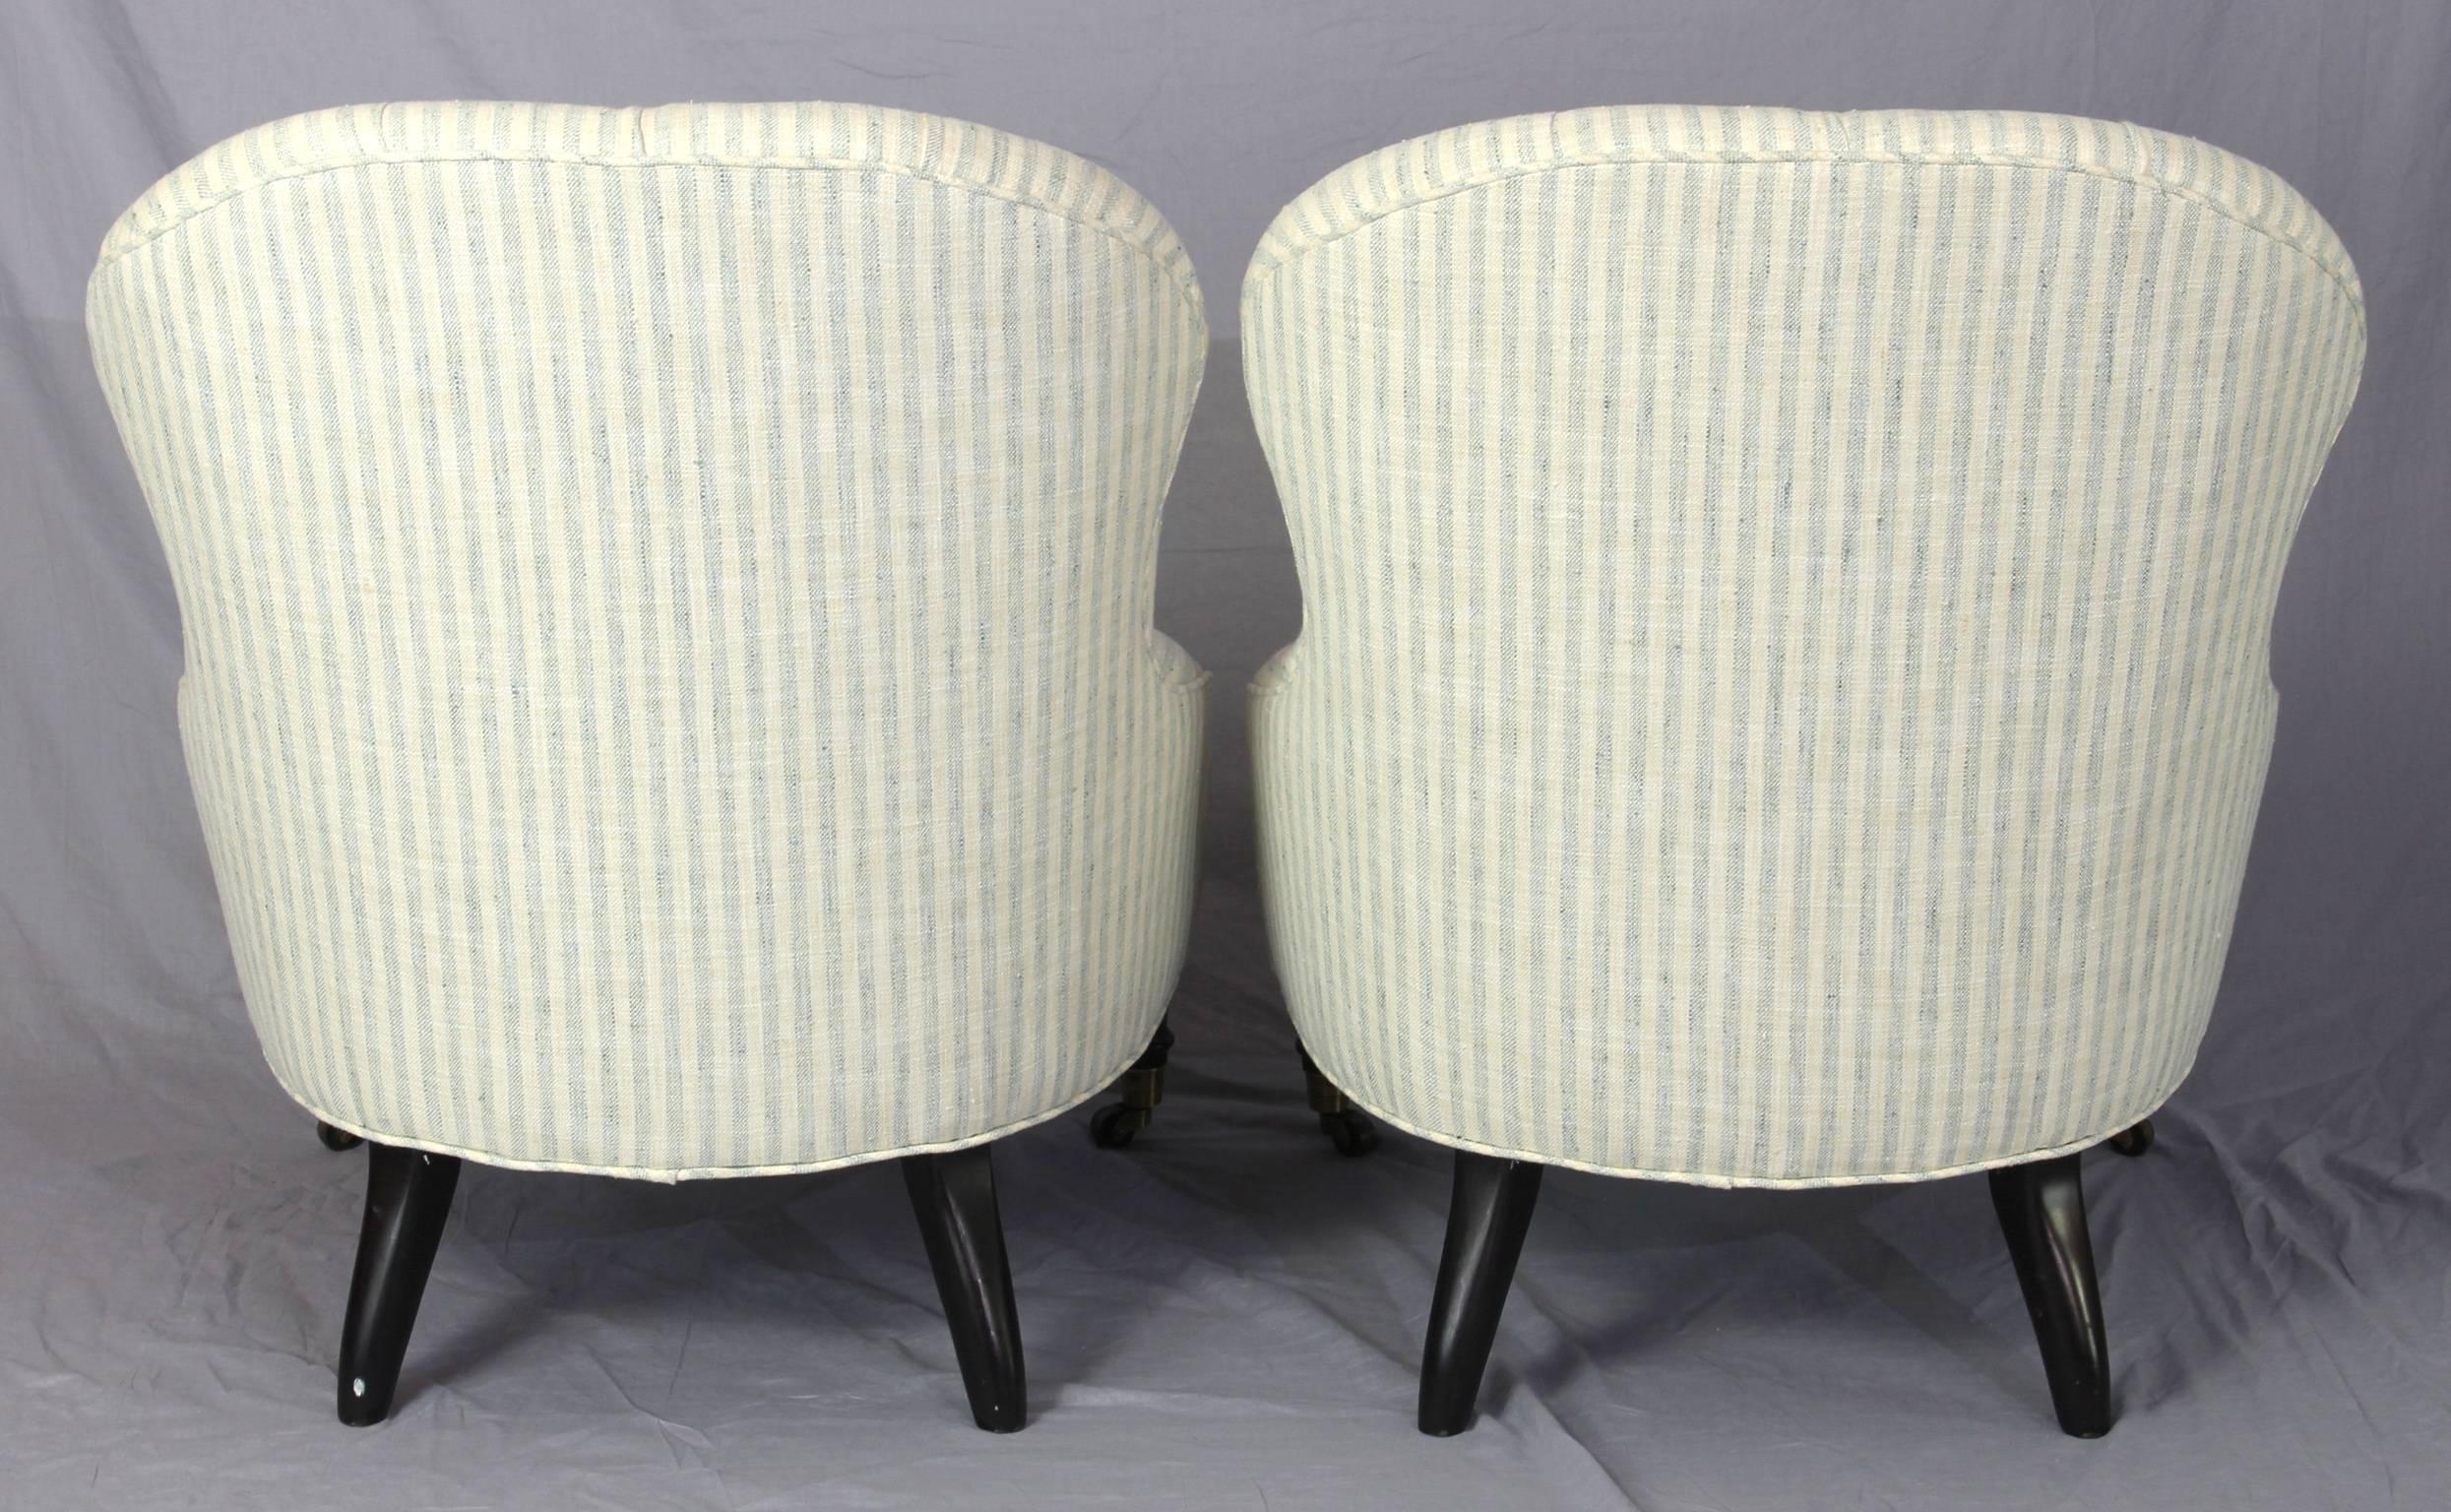 Late 20th Century Pair of Edwardian Style Slipper Chairs